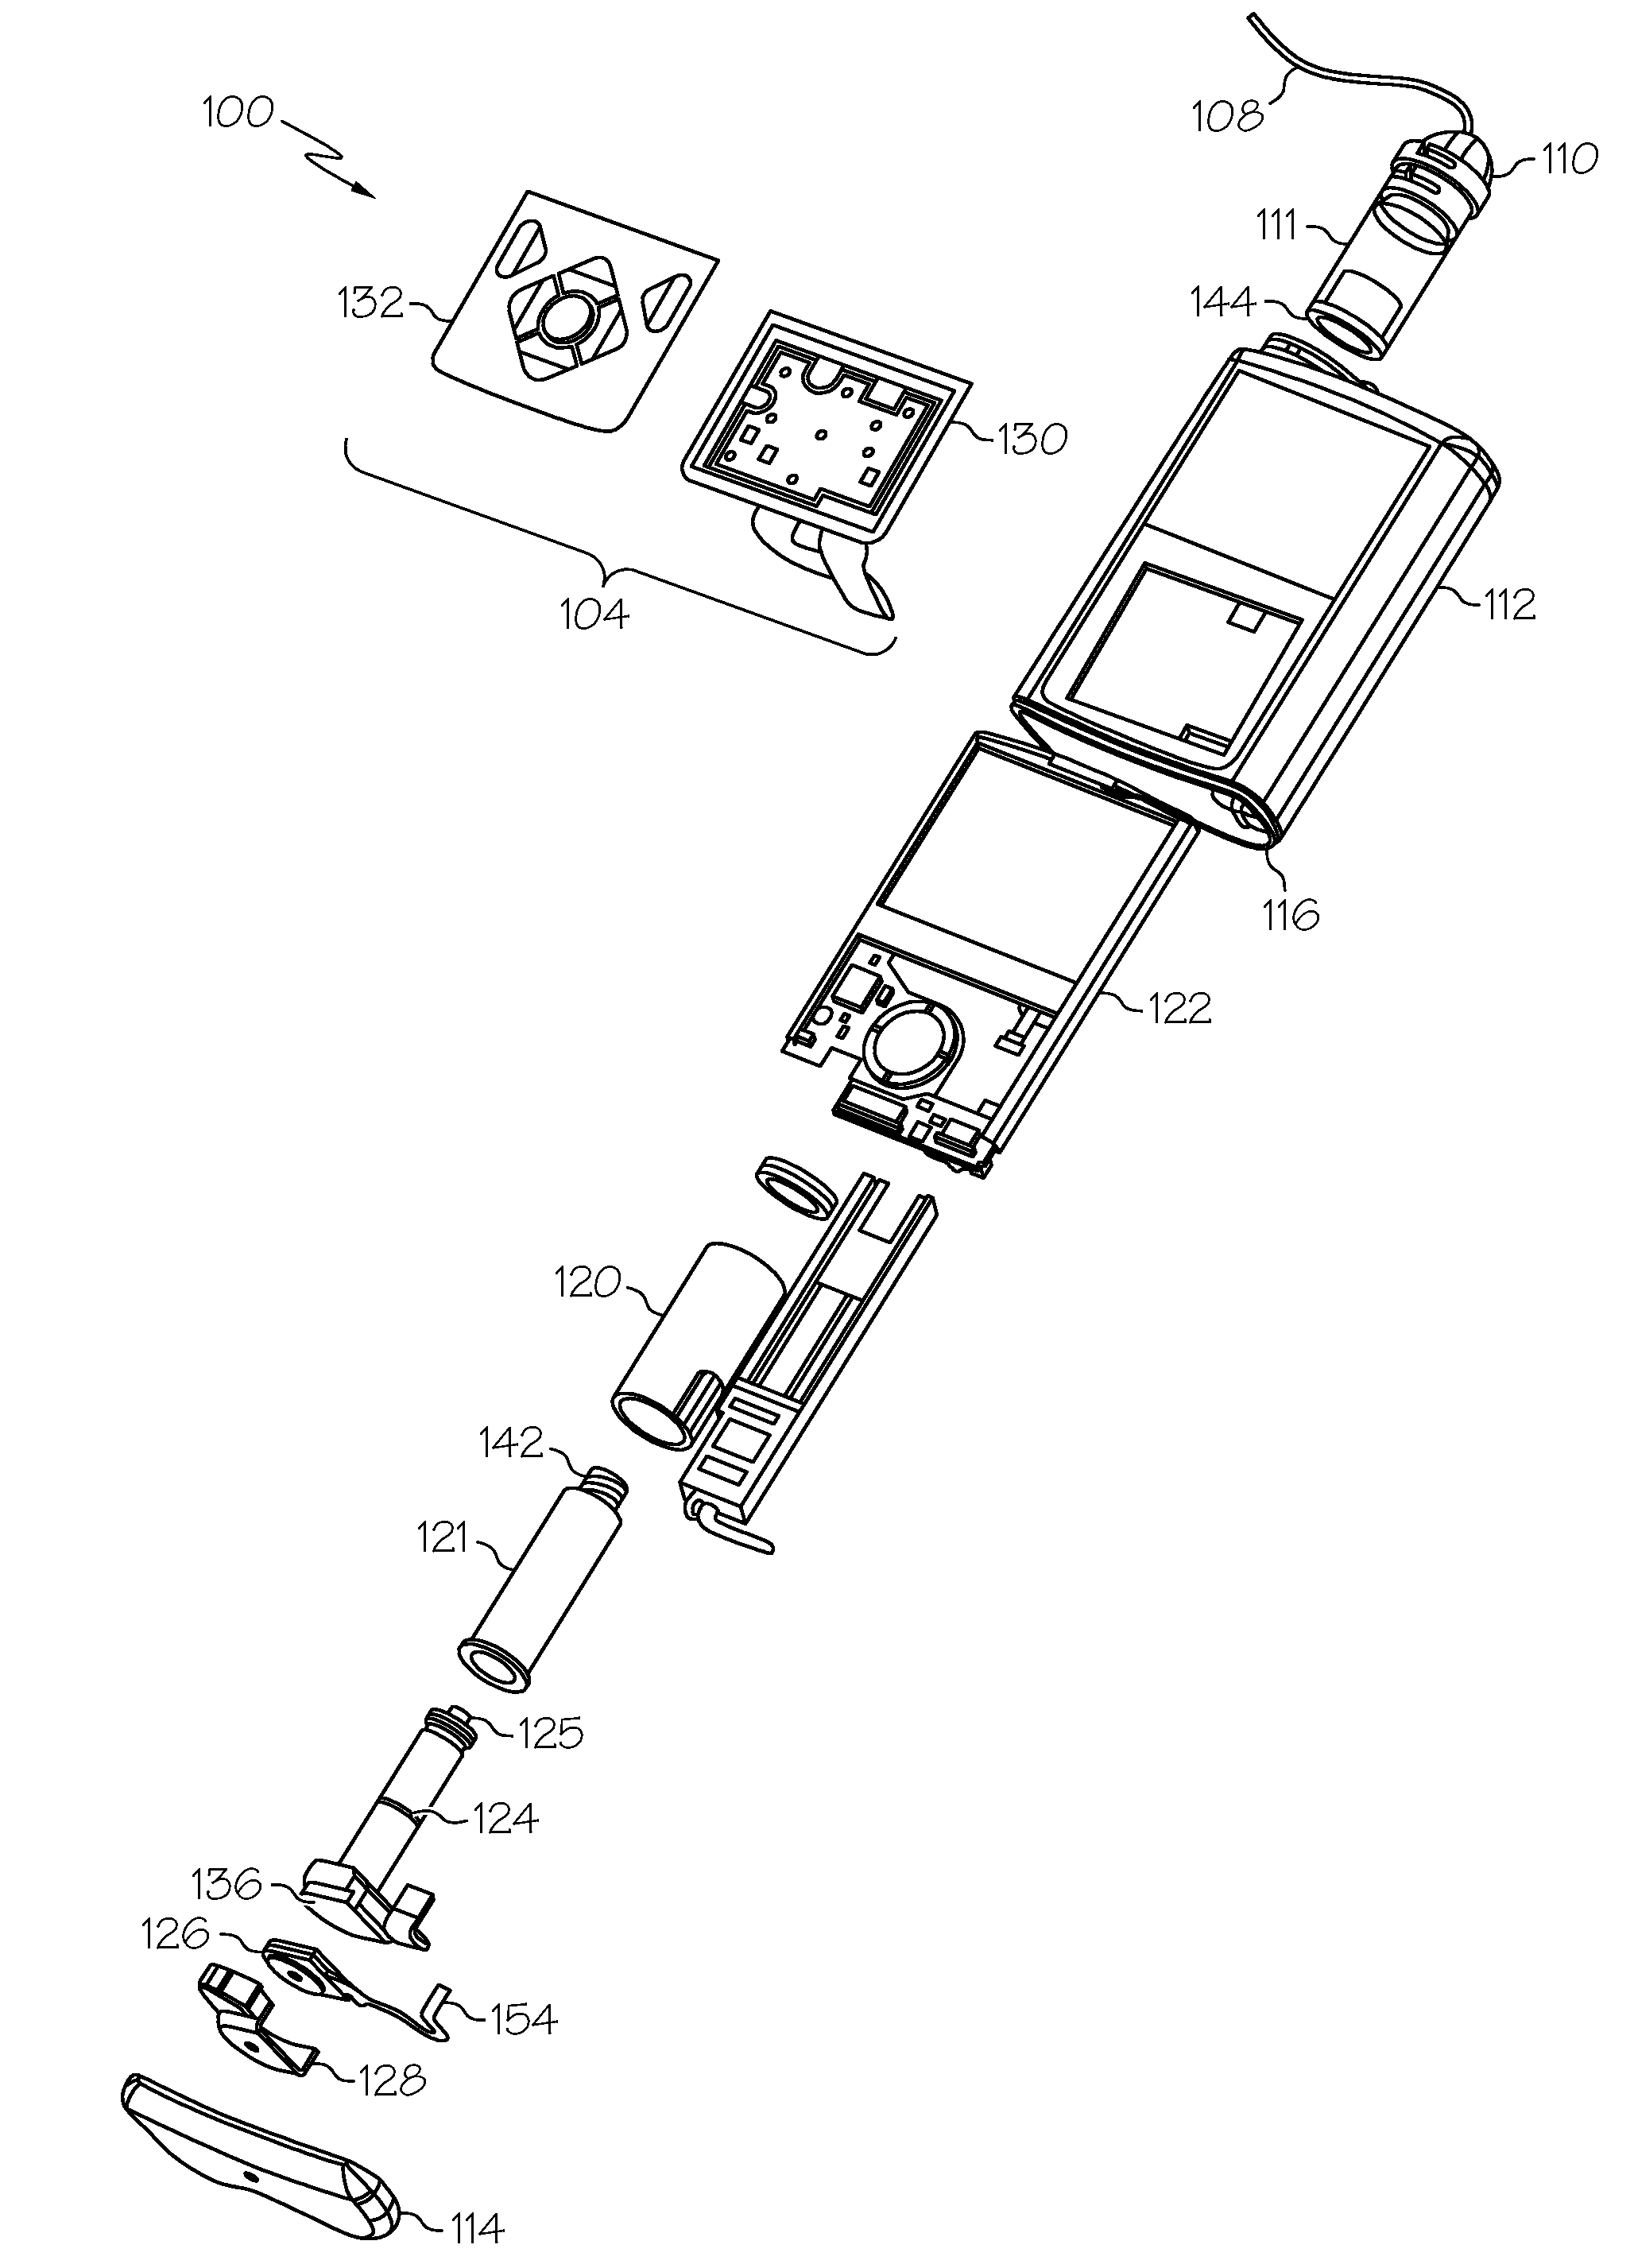 Occlusion detection for a fluid infusion device